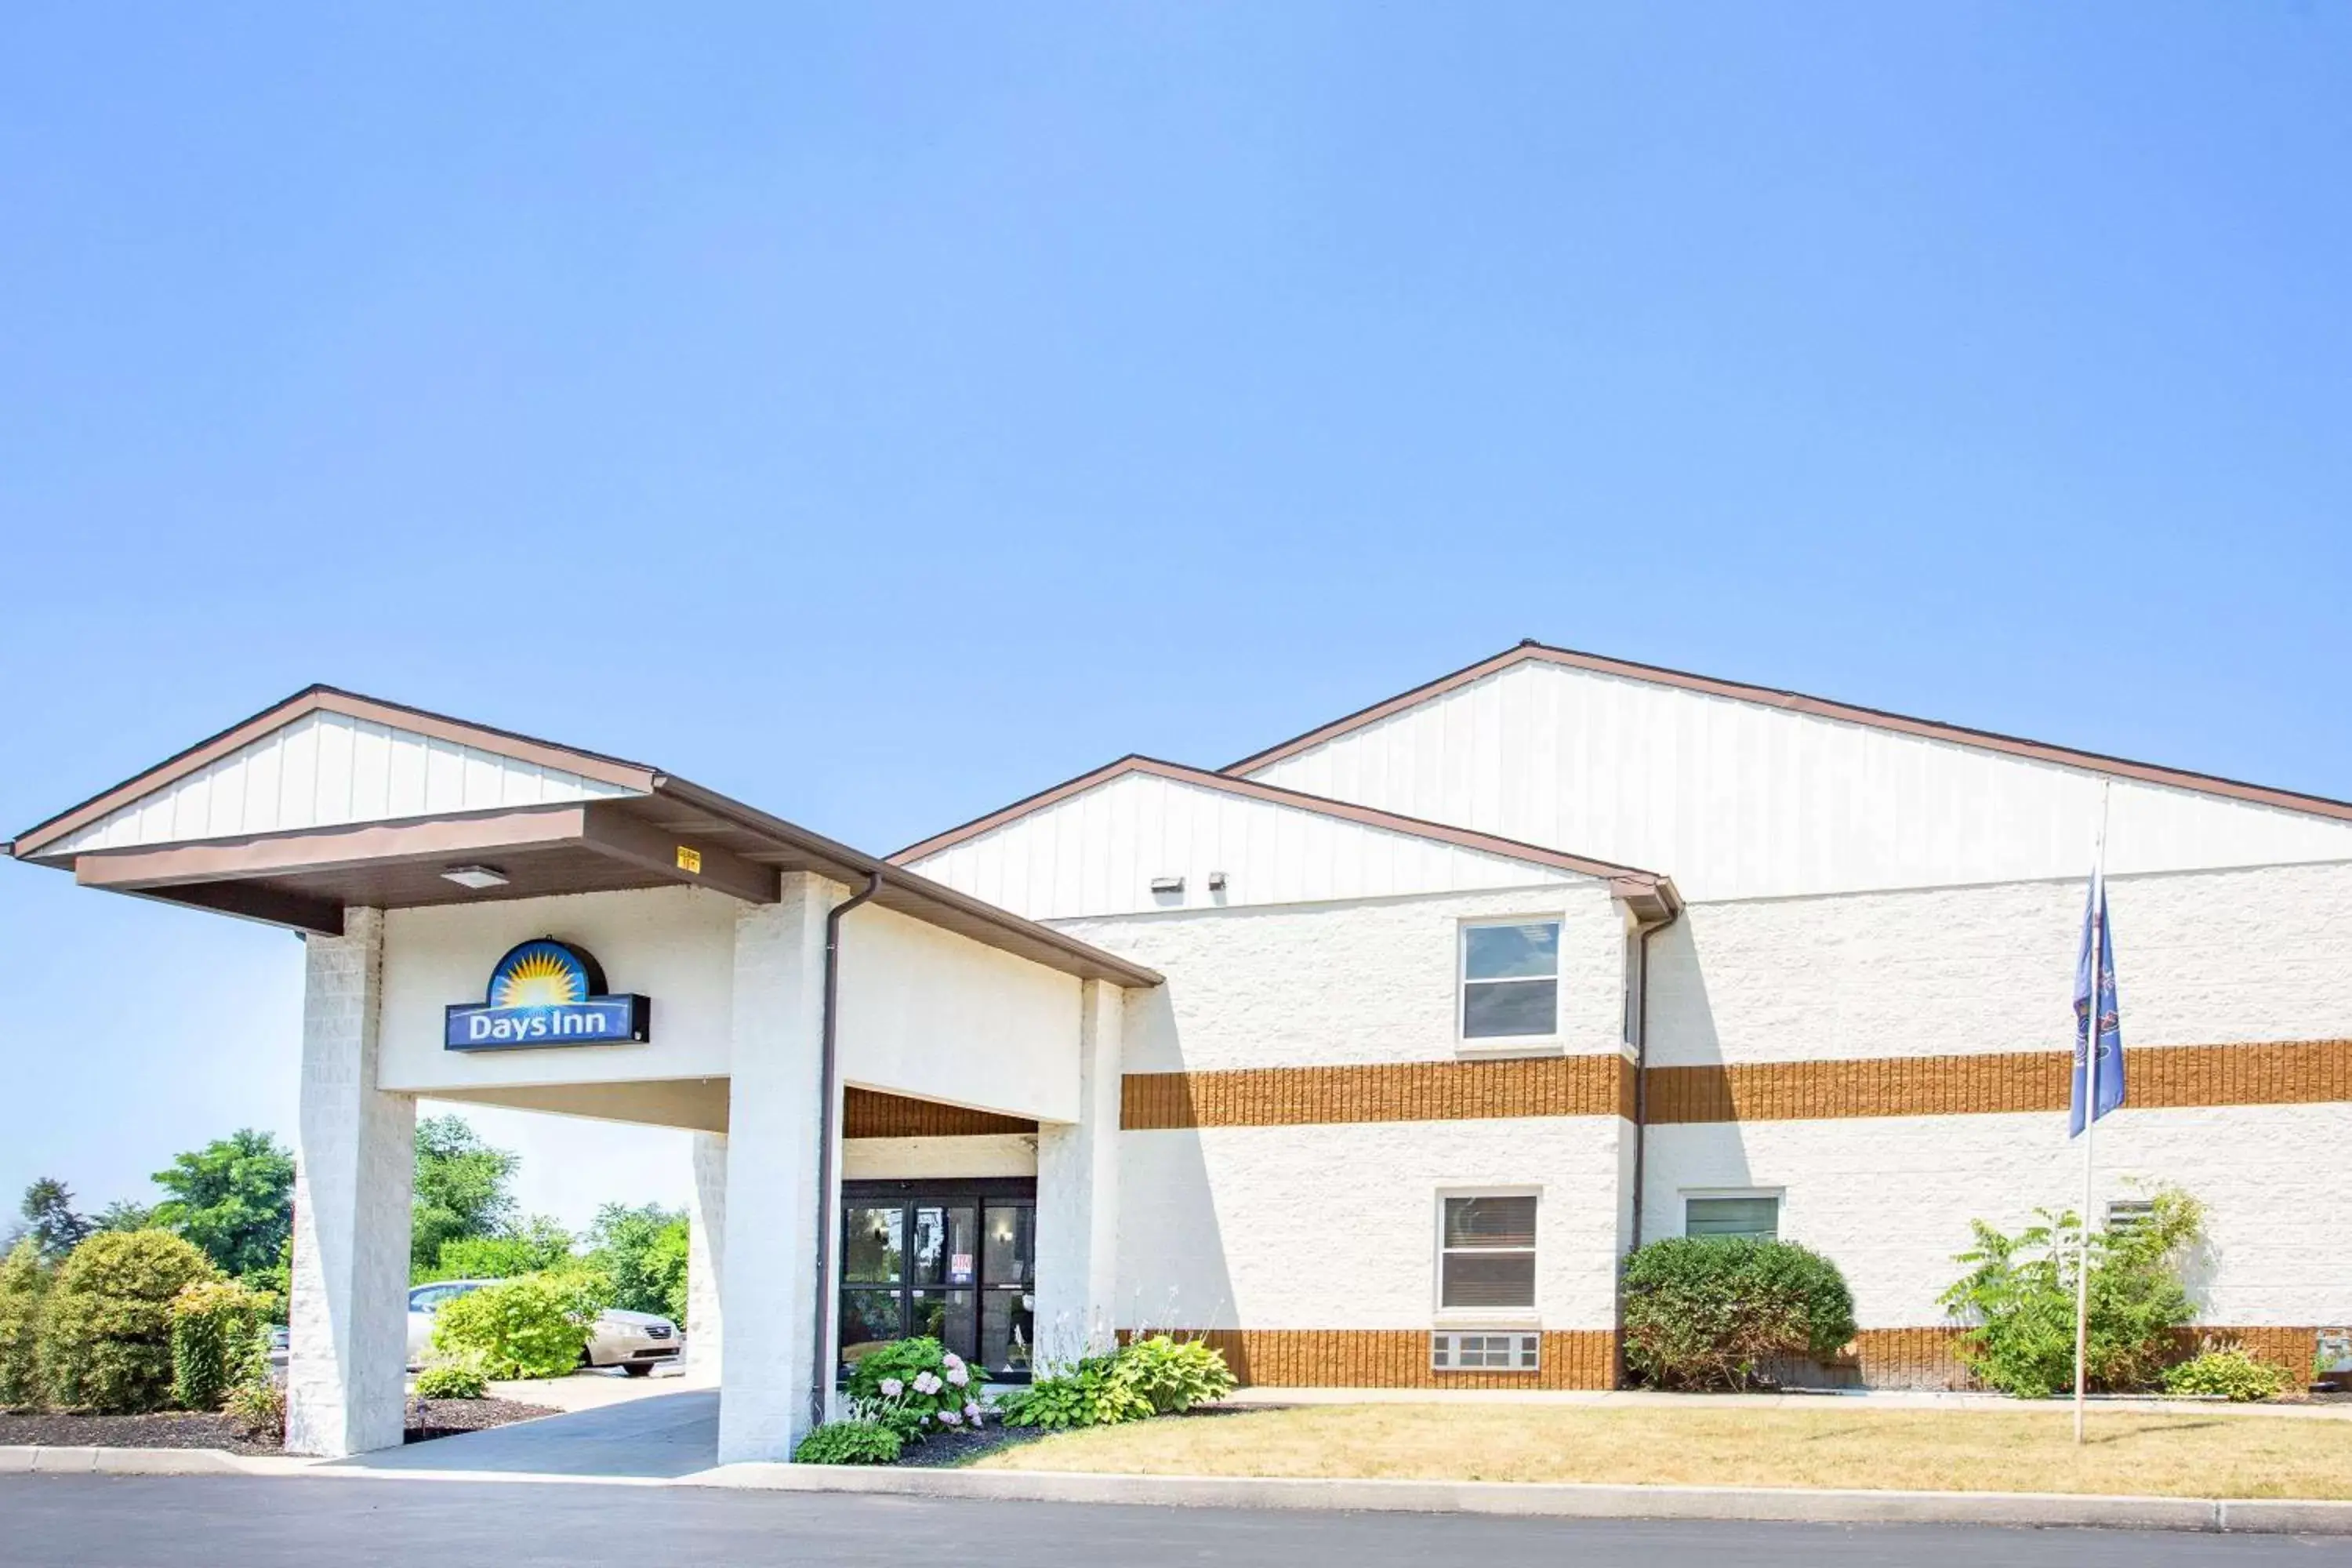 Property Building in Days Inn by Wyndham Lancaster PA Dutch Country